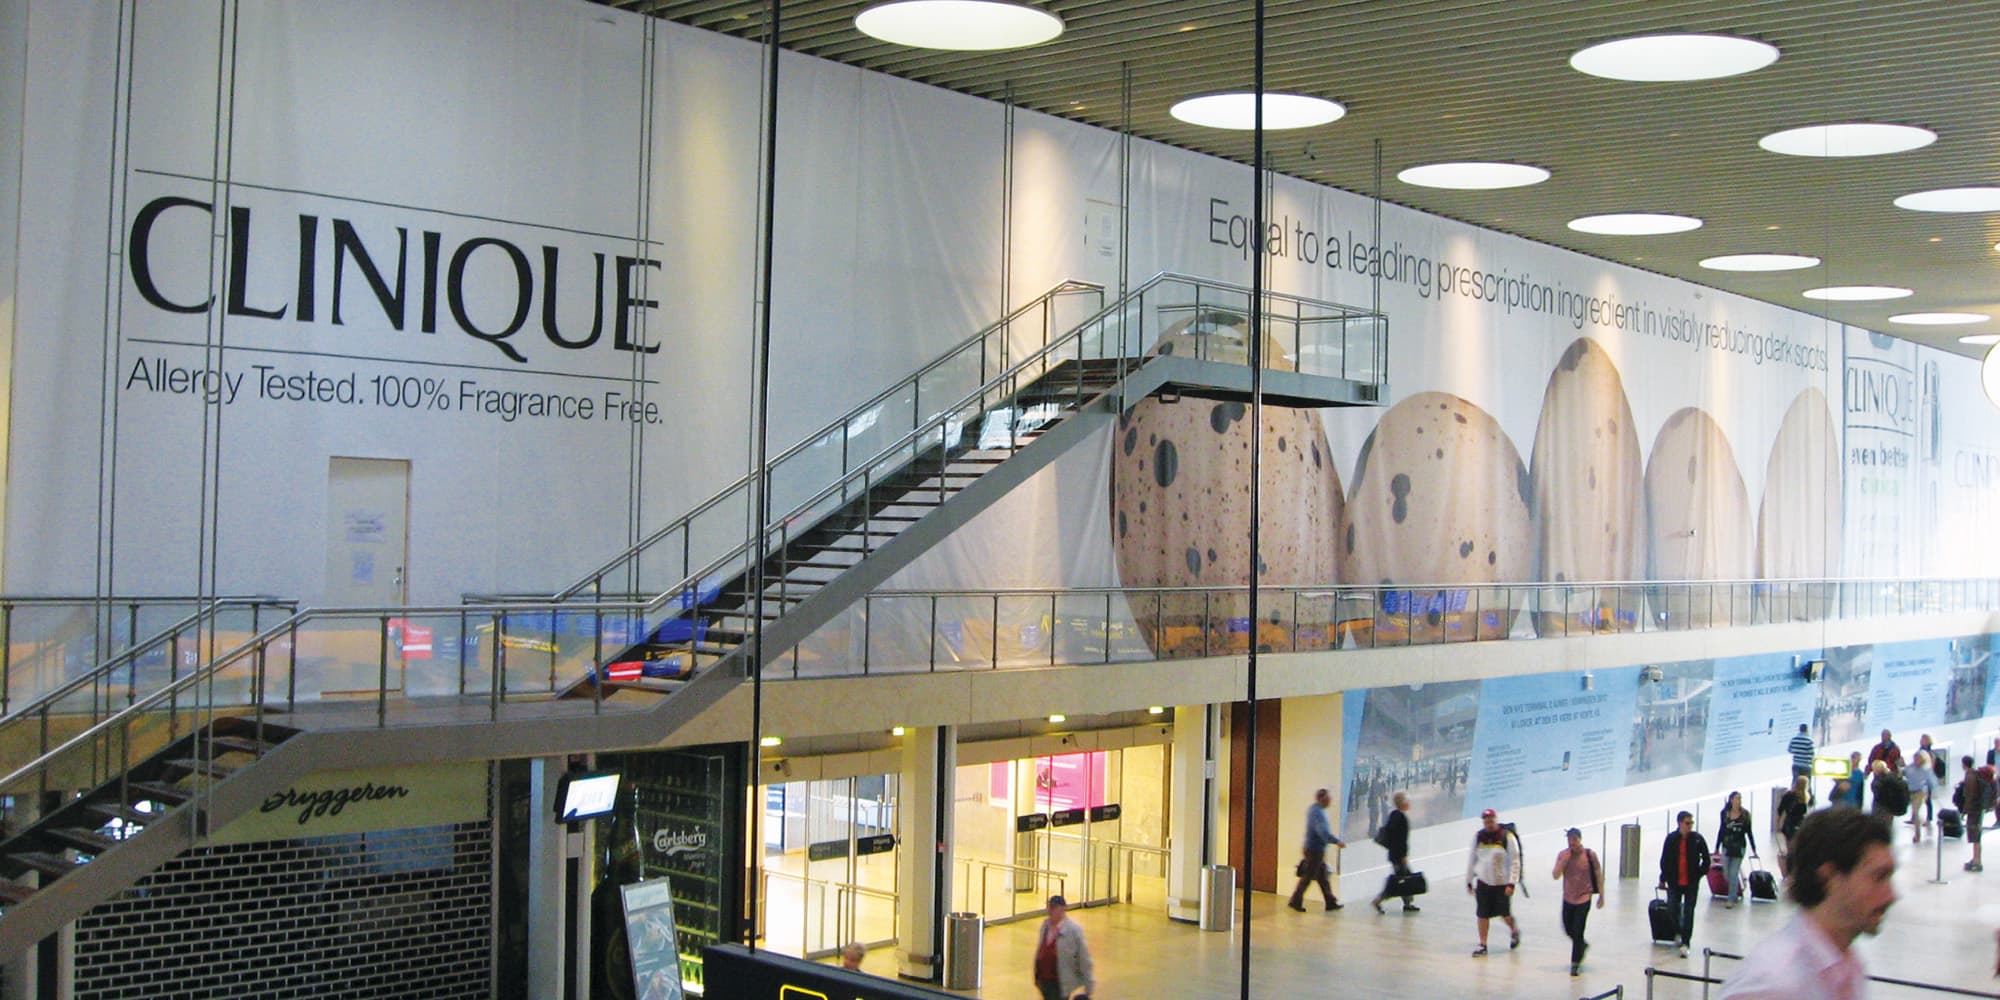 Printed Banners Clinique Airport Advertising